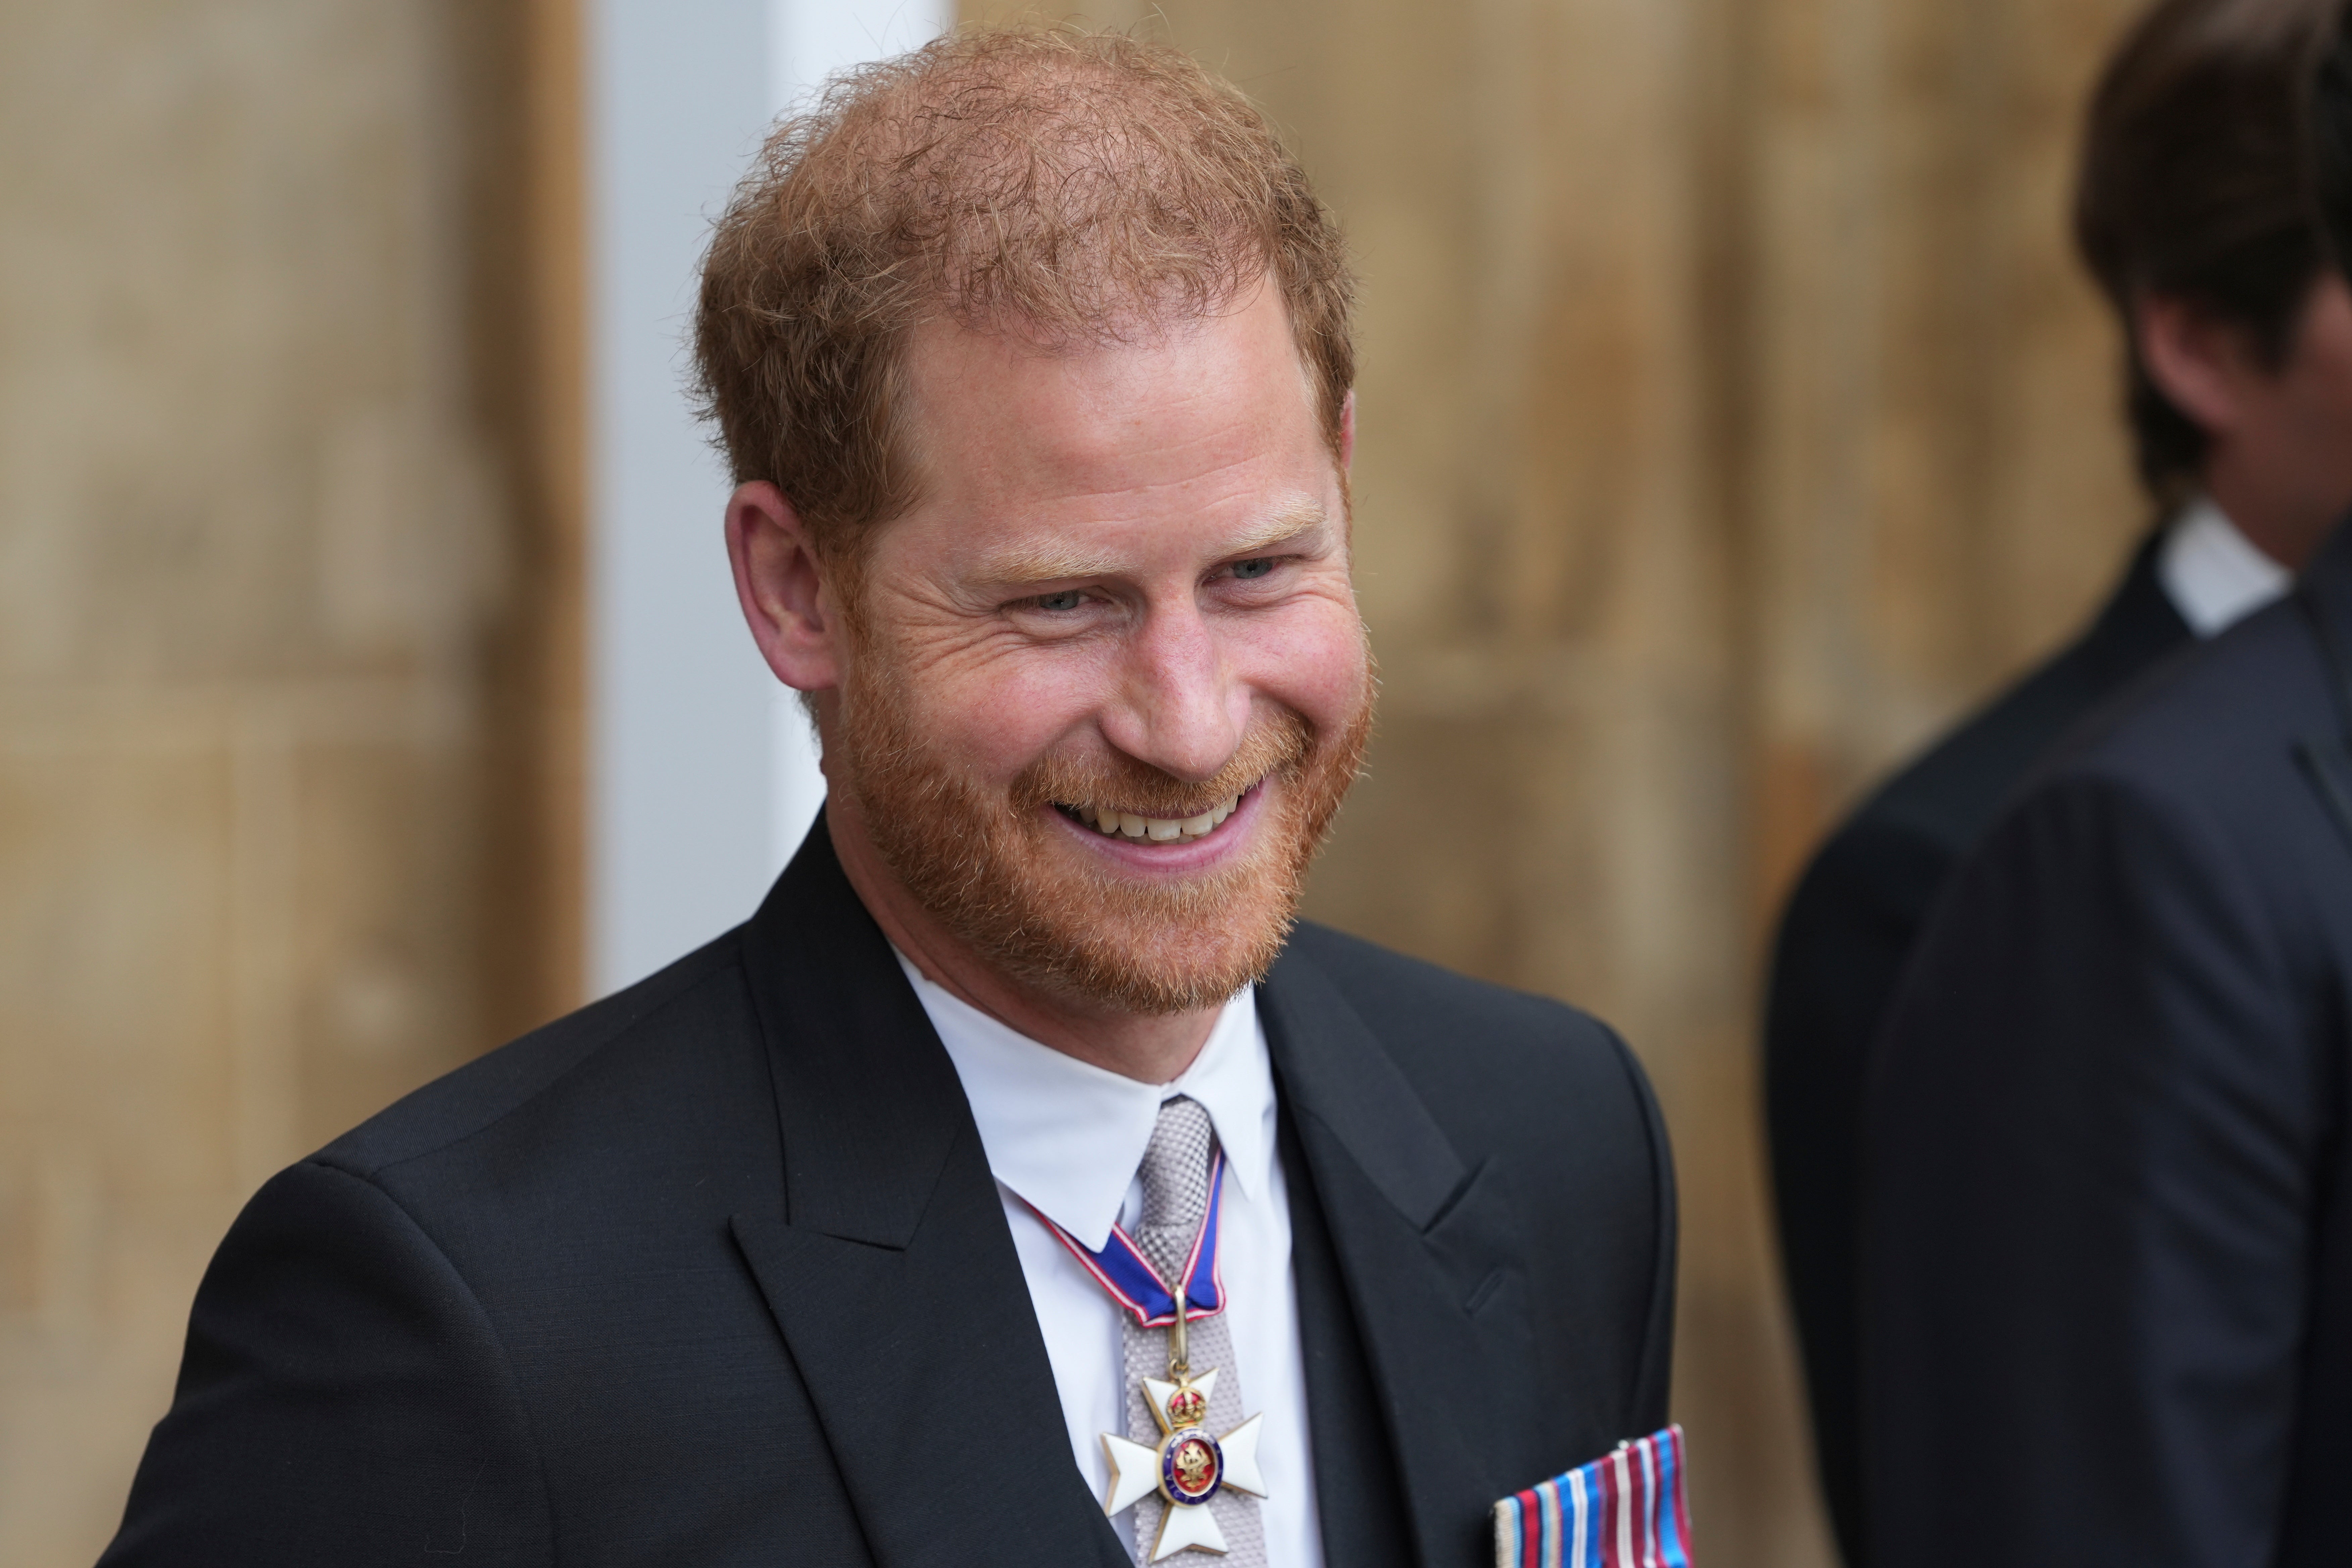 Prince Harry is taking legal action against Mirror Group Newspapers